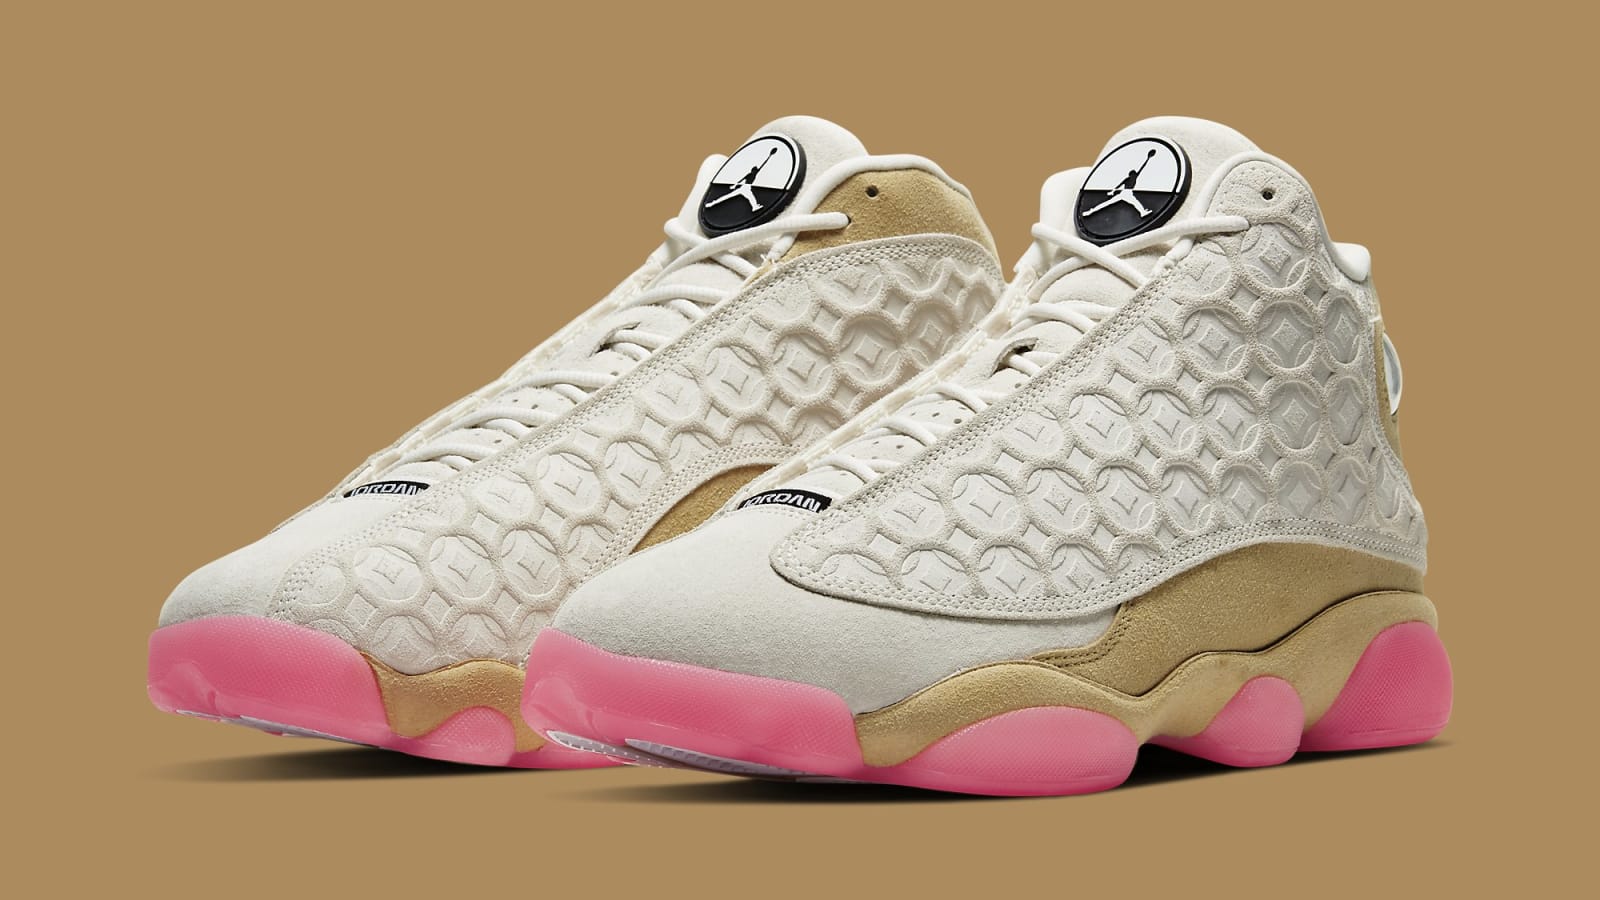 Air Jordan 13 &quot;Chinese New Year&quot; Officially Unveiled: Detailed Photos